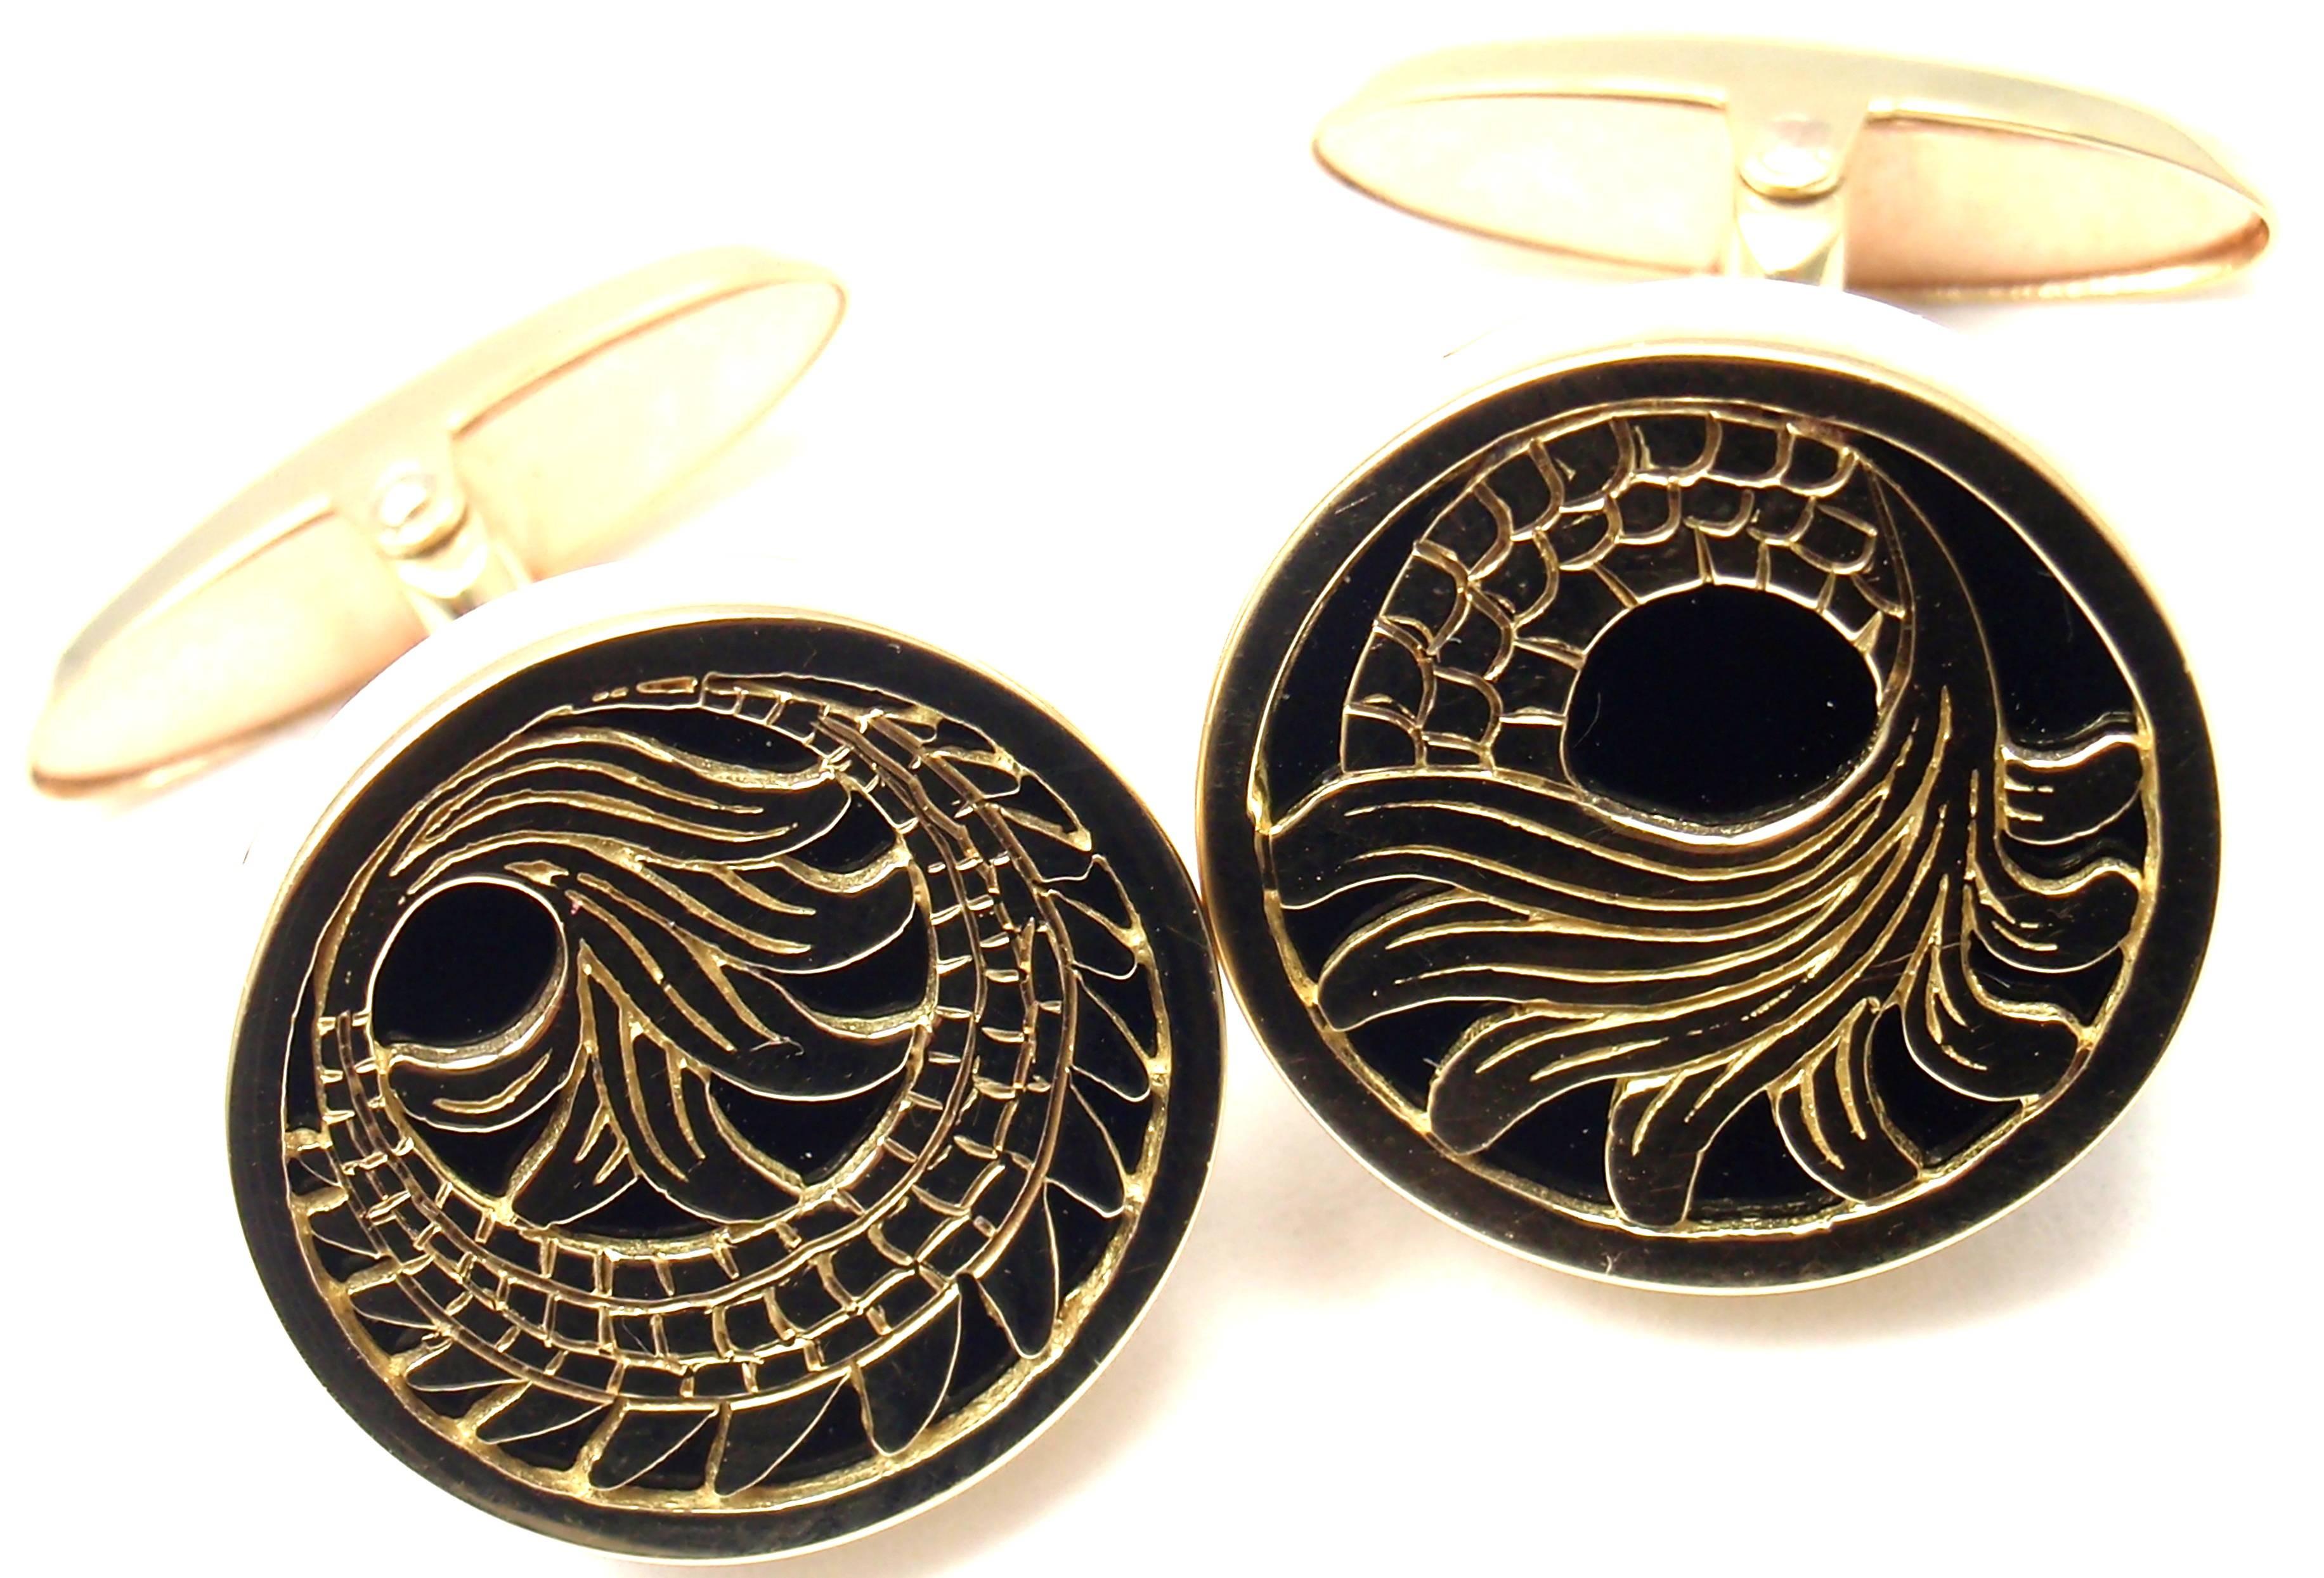 18k Yellow Gold Black Onyx Circulos De Fuego Drago Tail Cufflinks by 
Carrera Y Carrera.
With 2 black onyxes 

These cufflinks come with Box Certificate and Tag.

Details:
Measurements: 16mm x 24mm x 17mm
Weight: 14.1 grams
Stamped